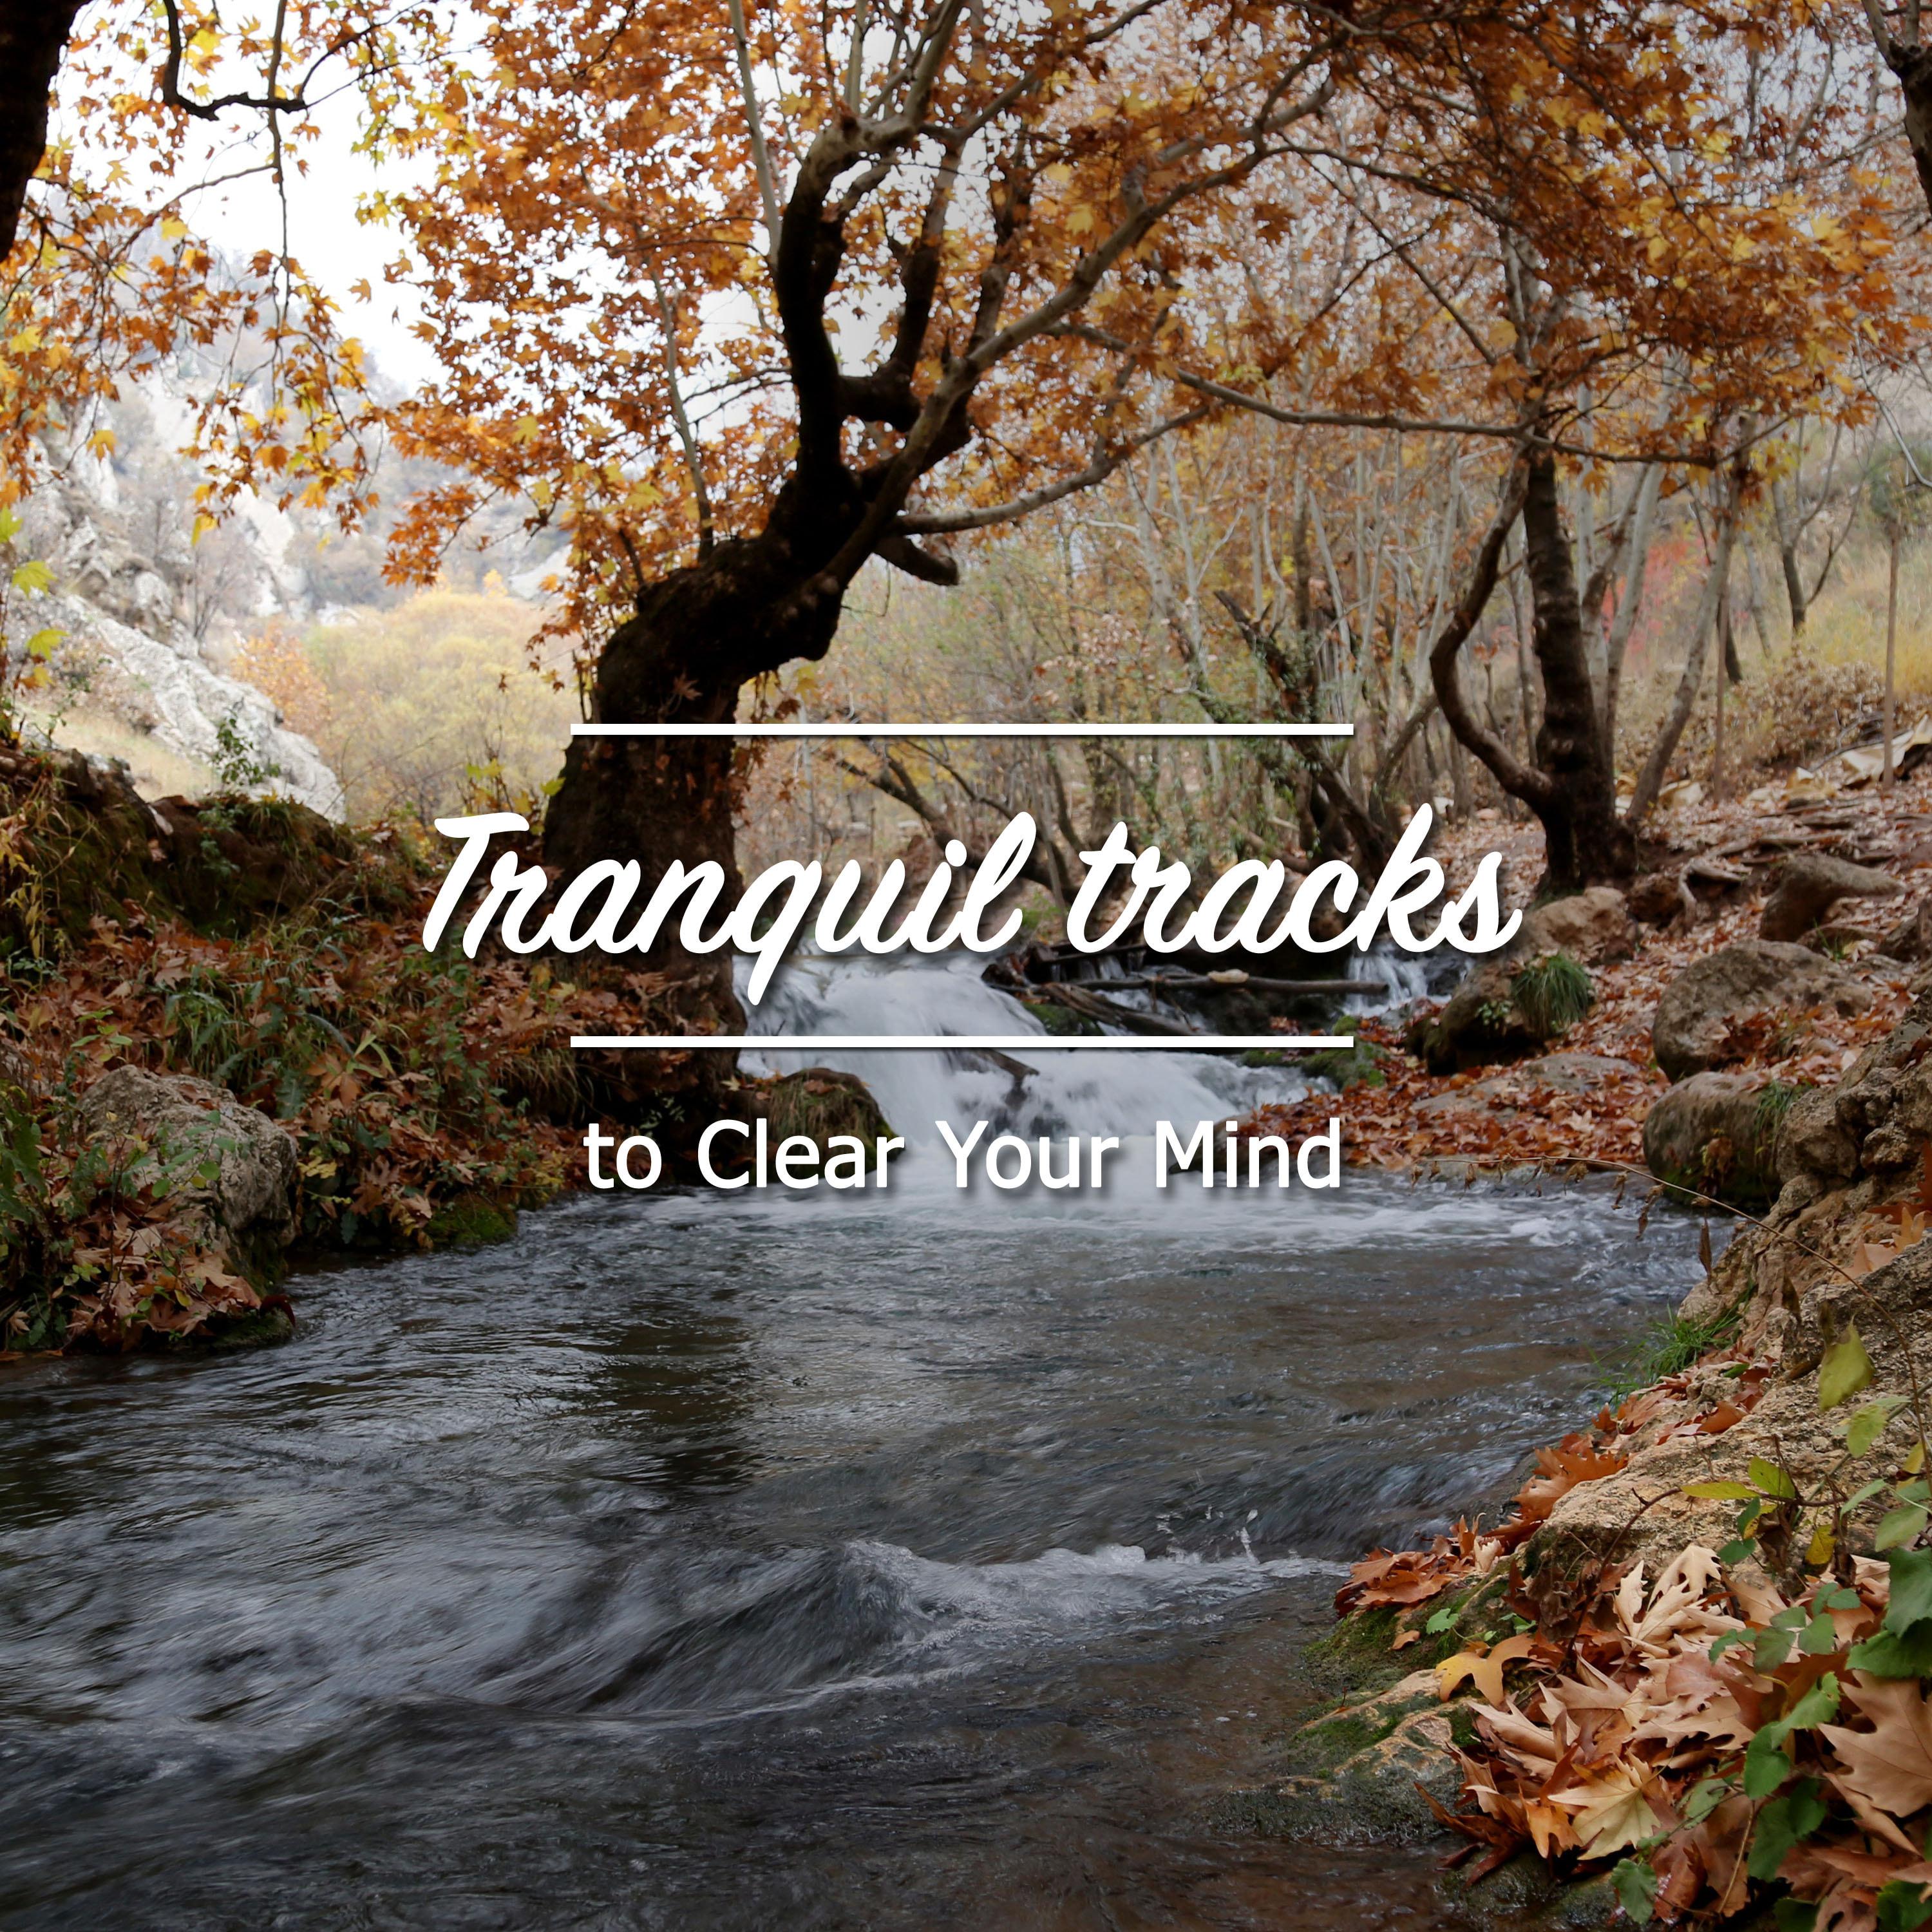 #11 Tranquil Tracks to Clear your Mind